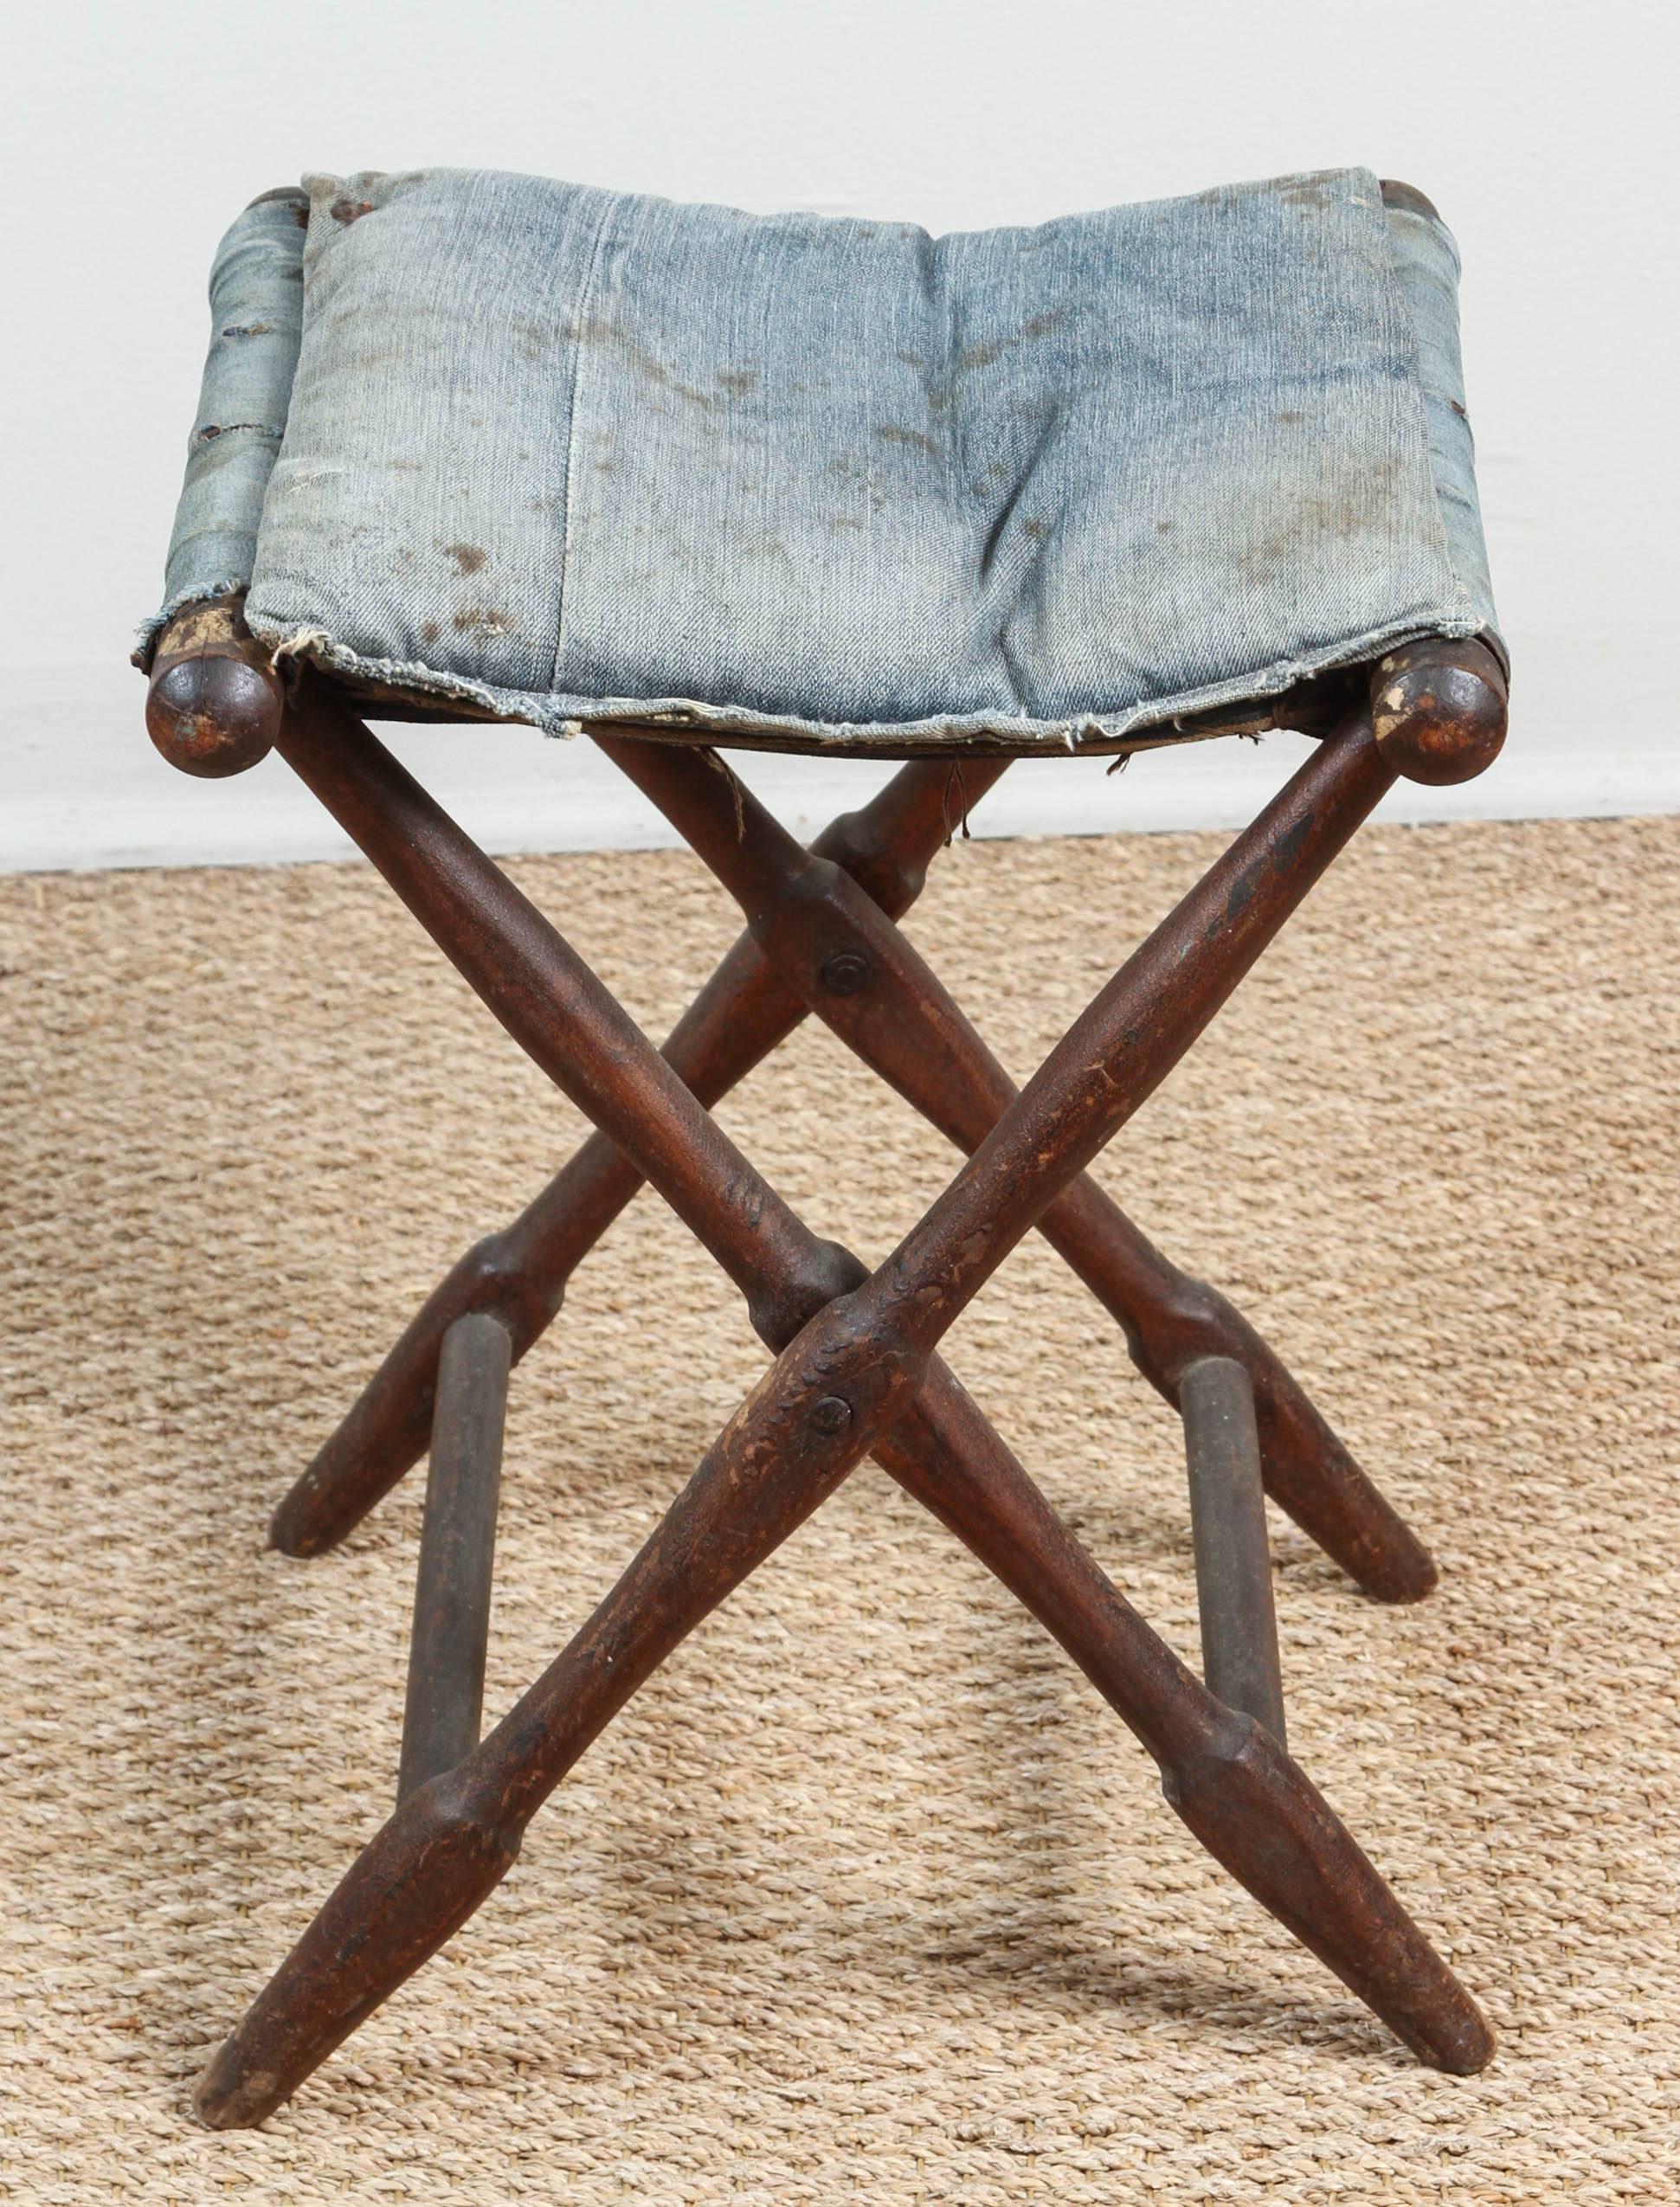 Vintage Folding Stool with Distressed and Faded Denim For Sale 1